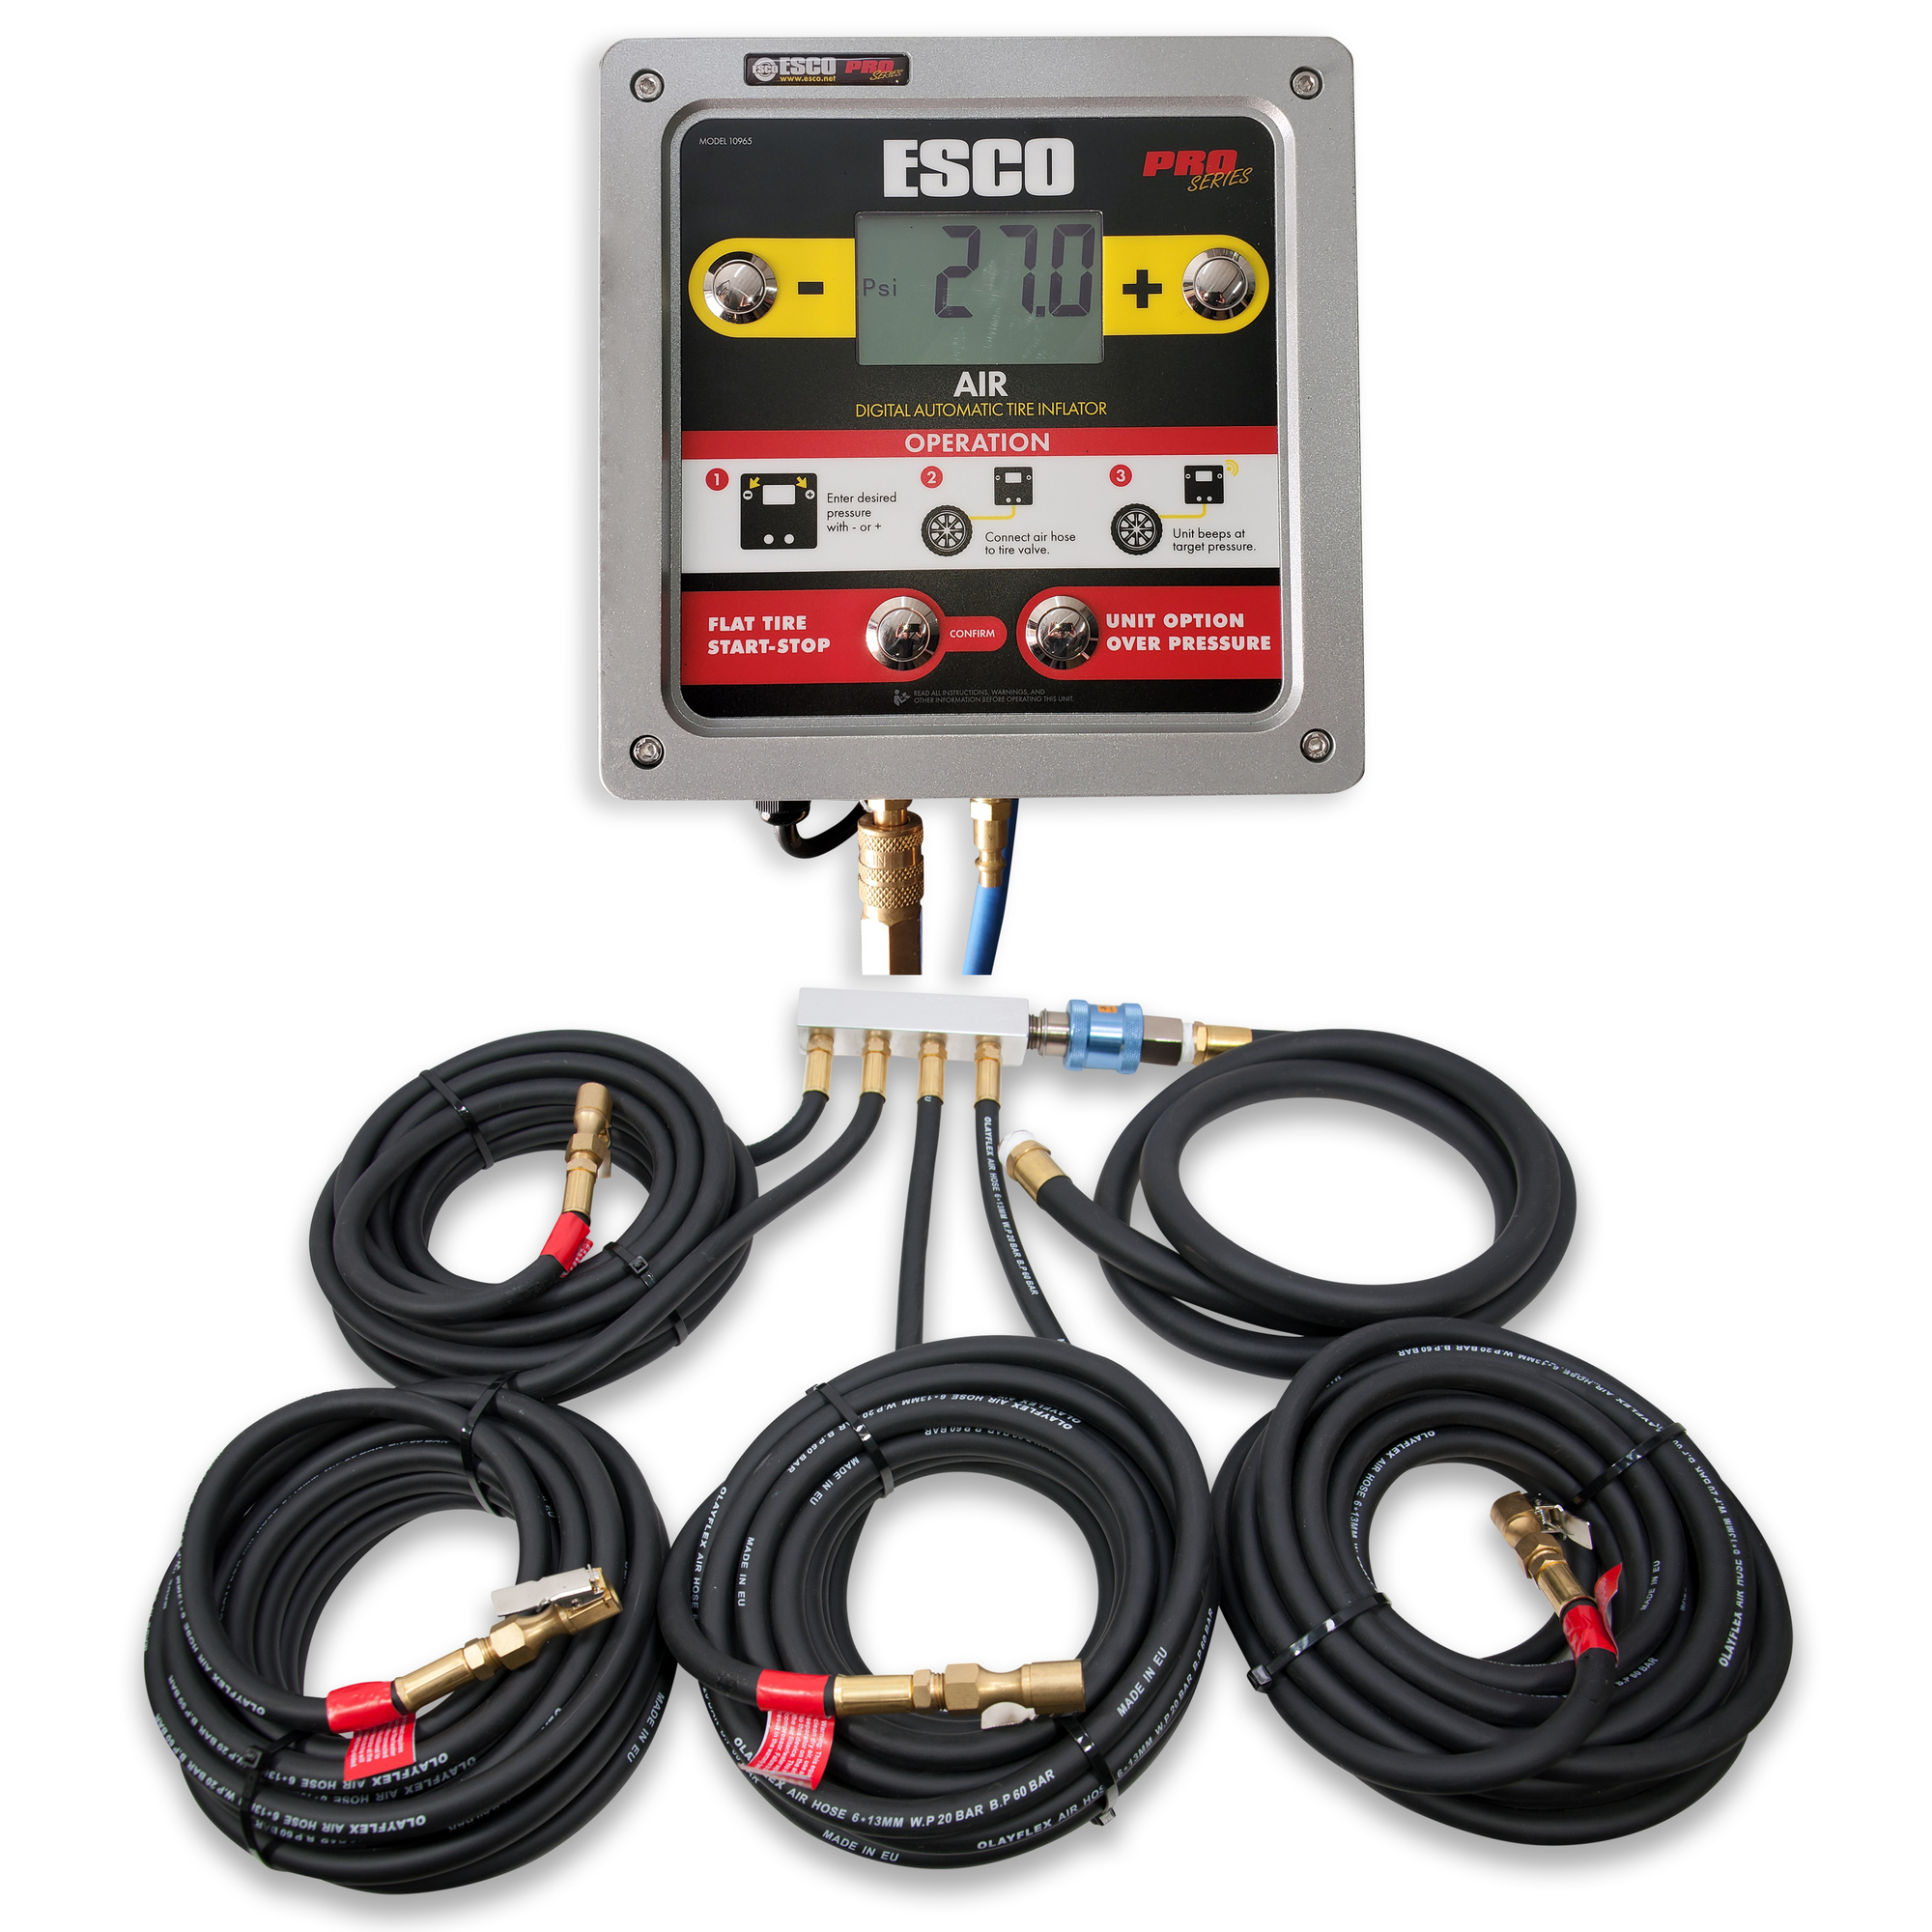 ESCO, Wall Mounted Tire inflator Kit, Max. PSI 145 Power Source Corded, Model 10965-K